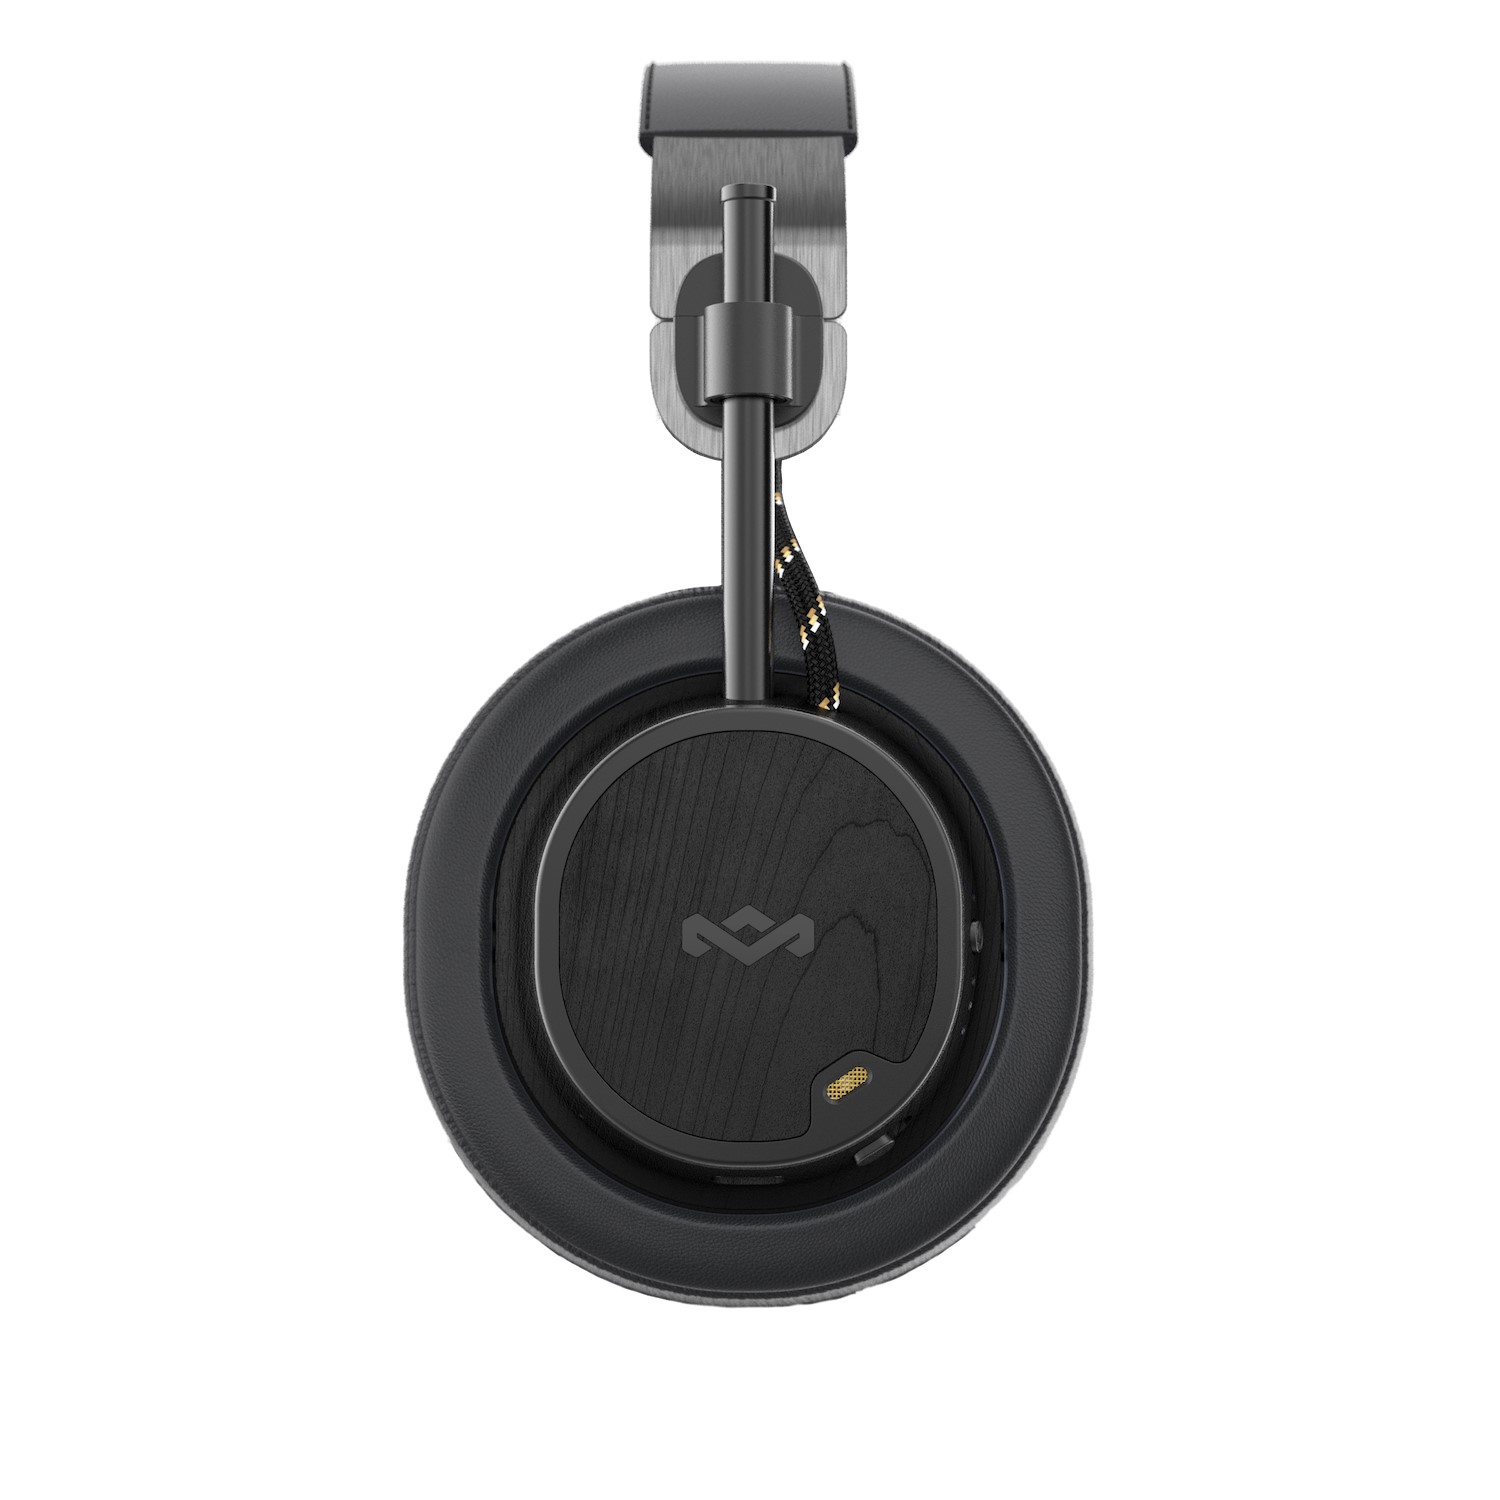 House of House of House of Marley Exodus ANC headphones in black on white background.